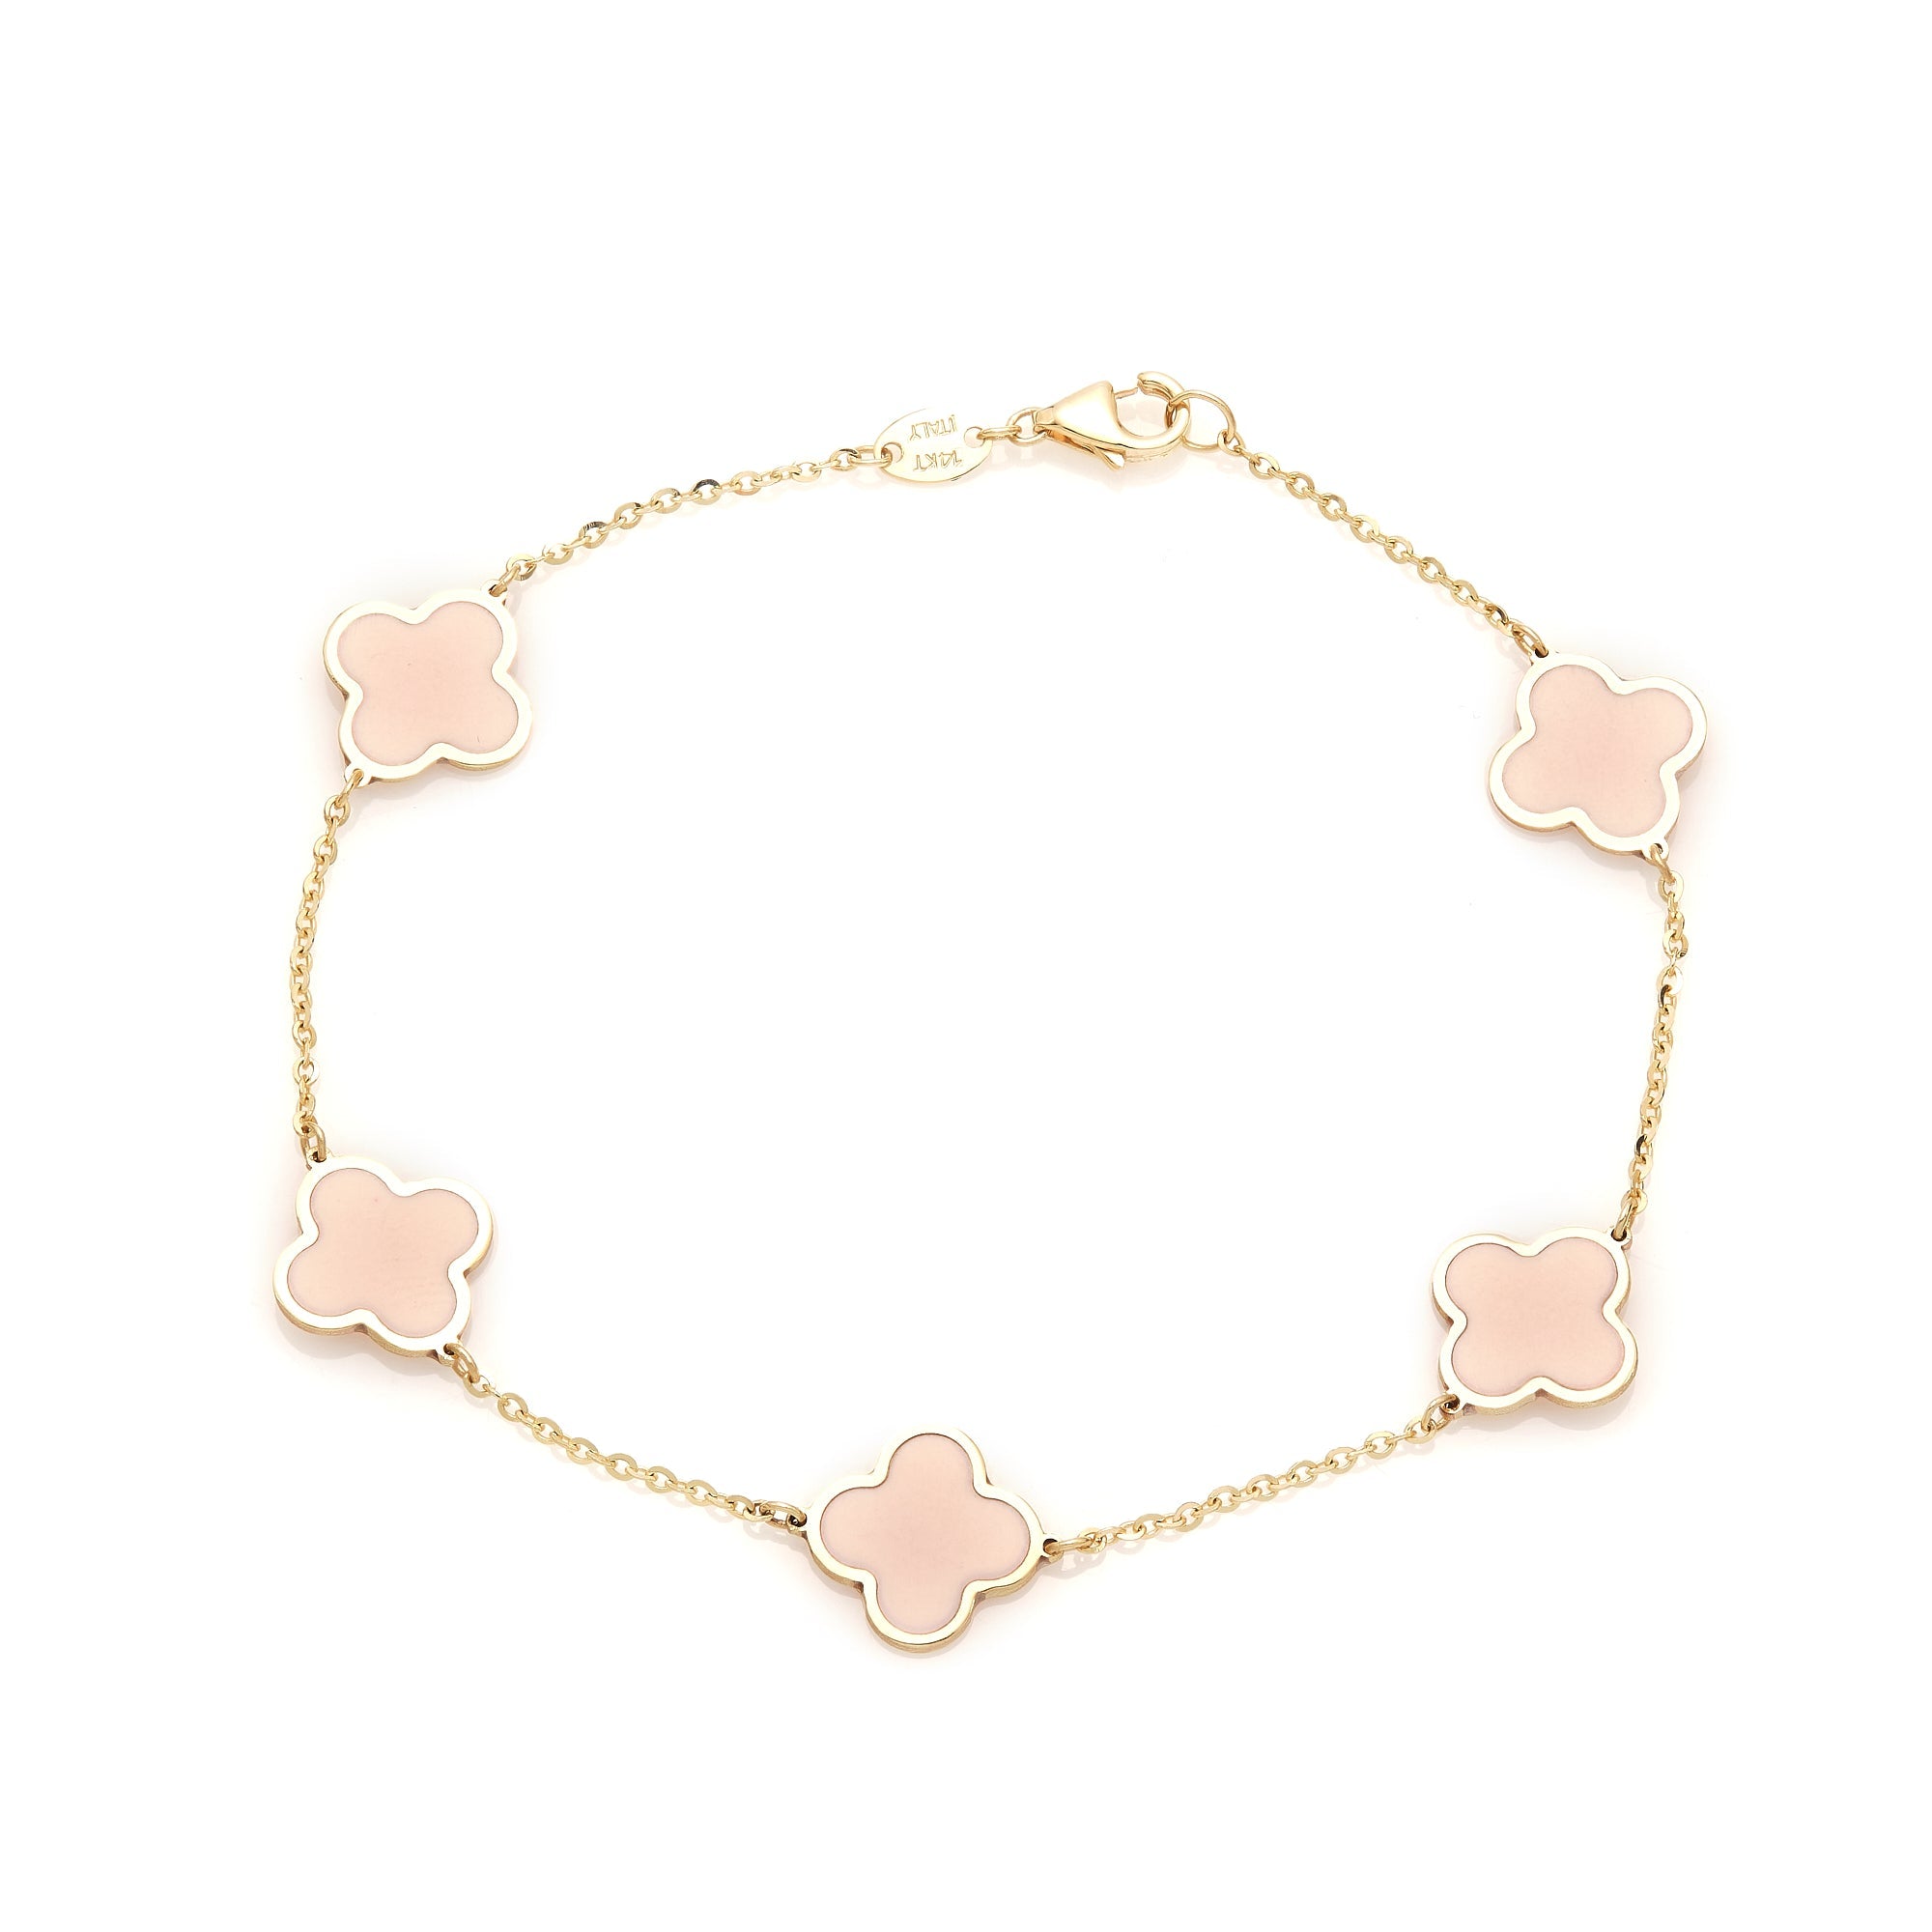 Color Blossom Bracelet, Pink Gold, White Gold, Pink Opal, White Mother-Of- Pearl And Diamonds - Jewelry - Collections